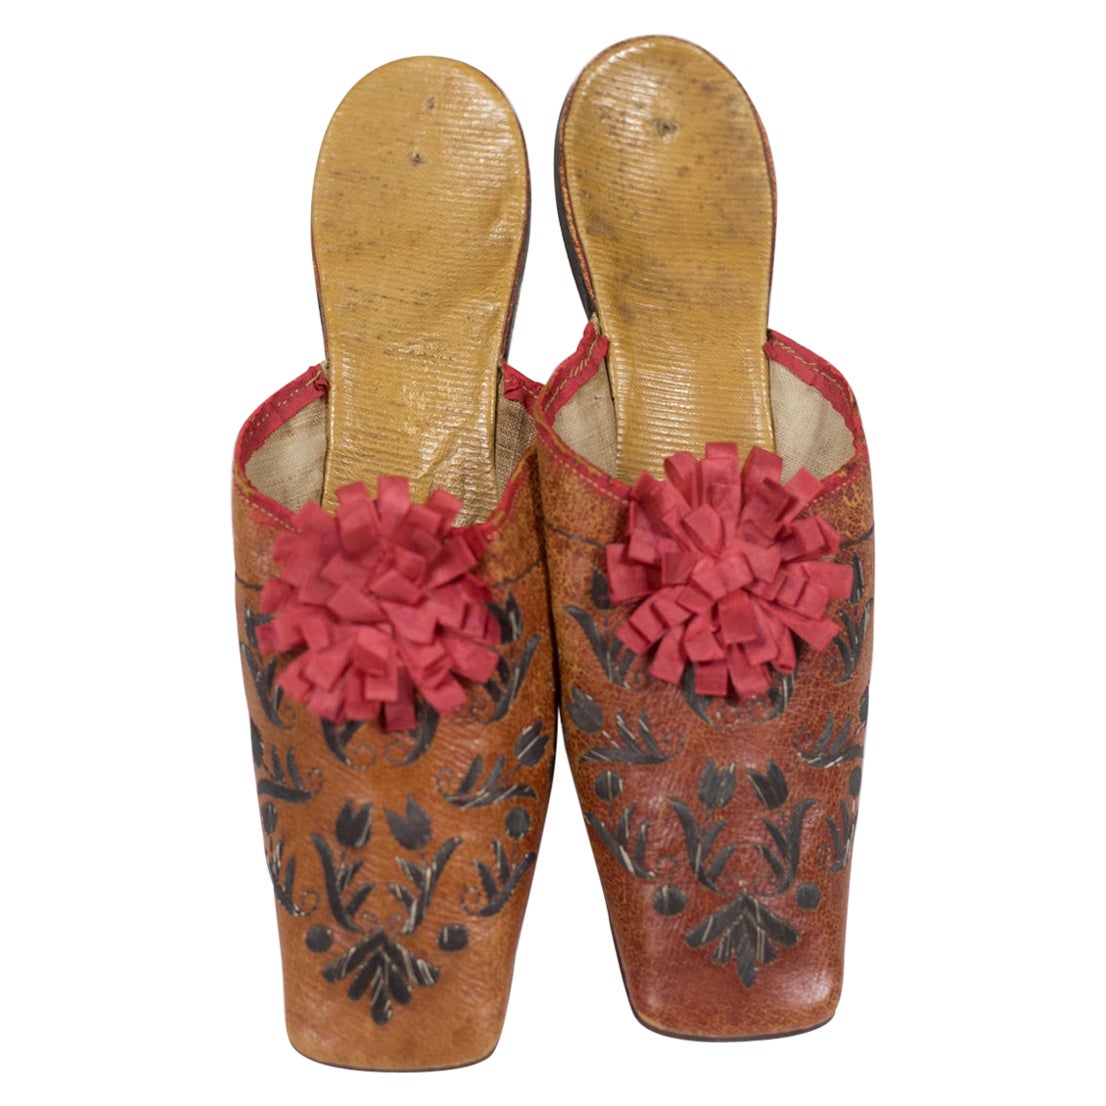 Pair Of Leather Slippers Embroidered With Tulips - France Early 19c For Sale